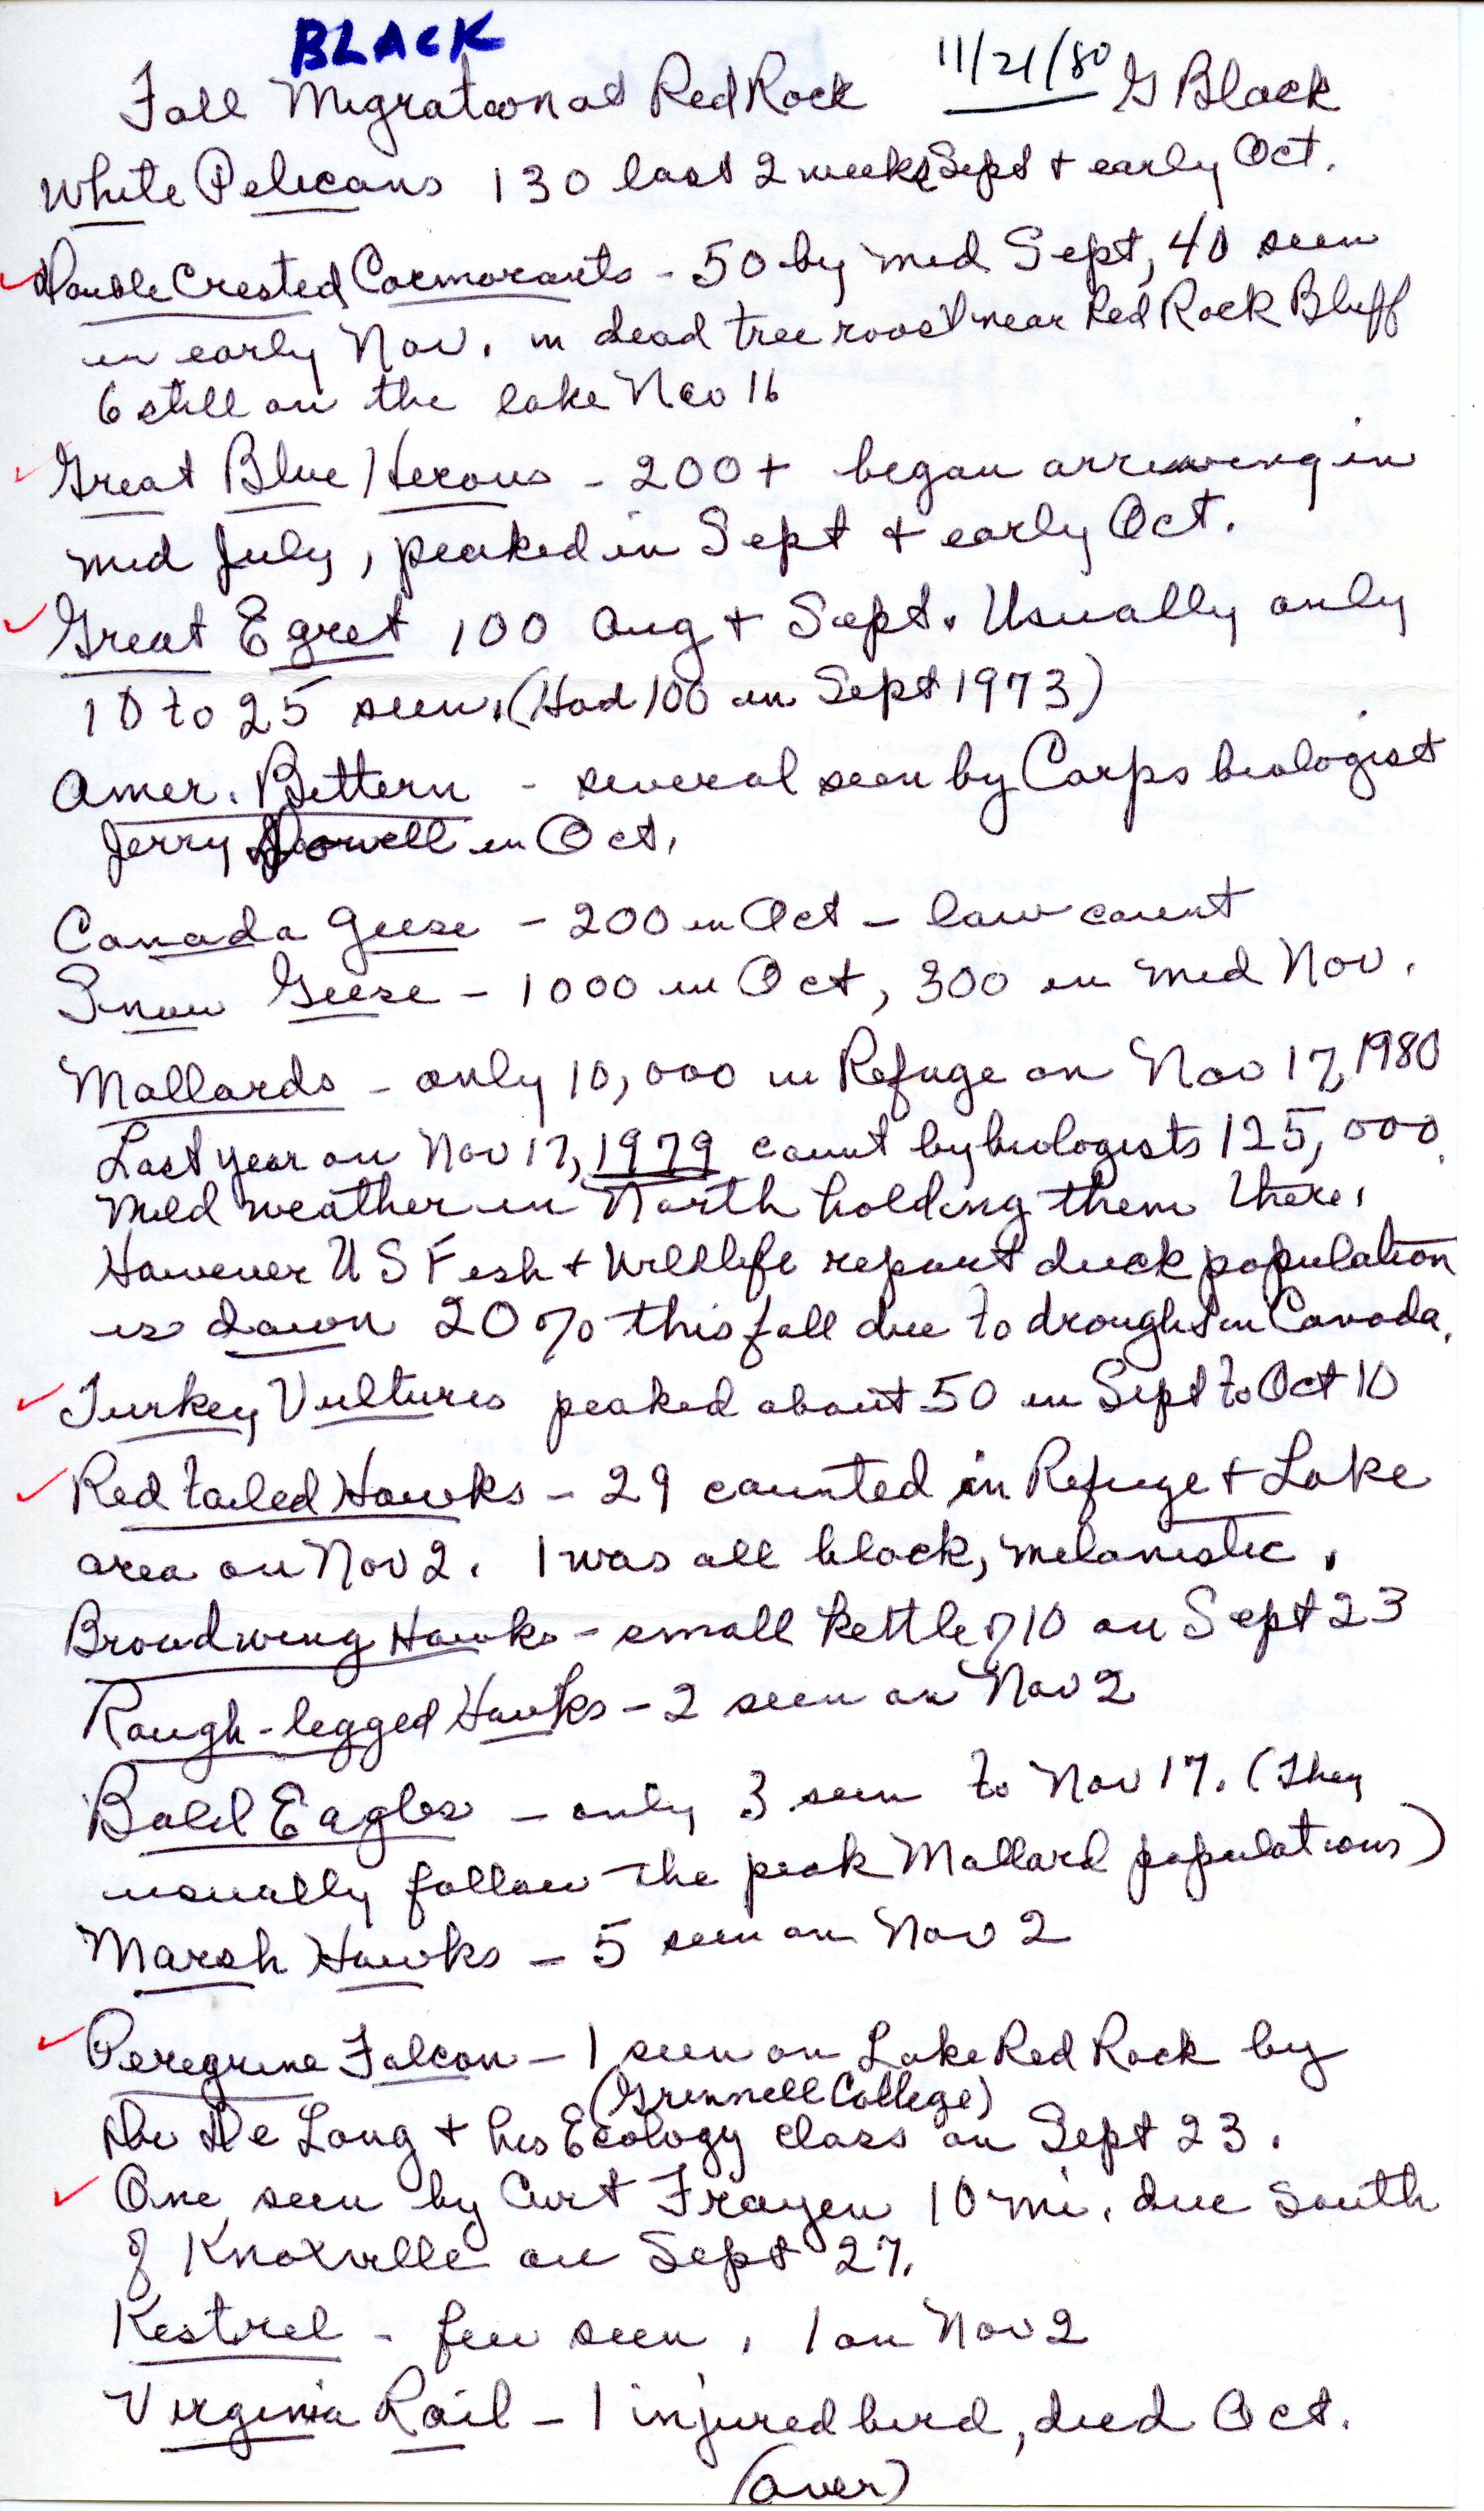 Field notes contributed by Gladys Black, November 21 1980